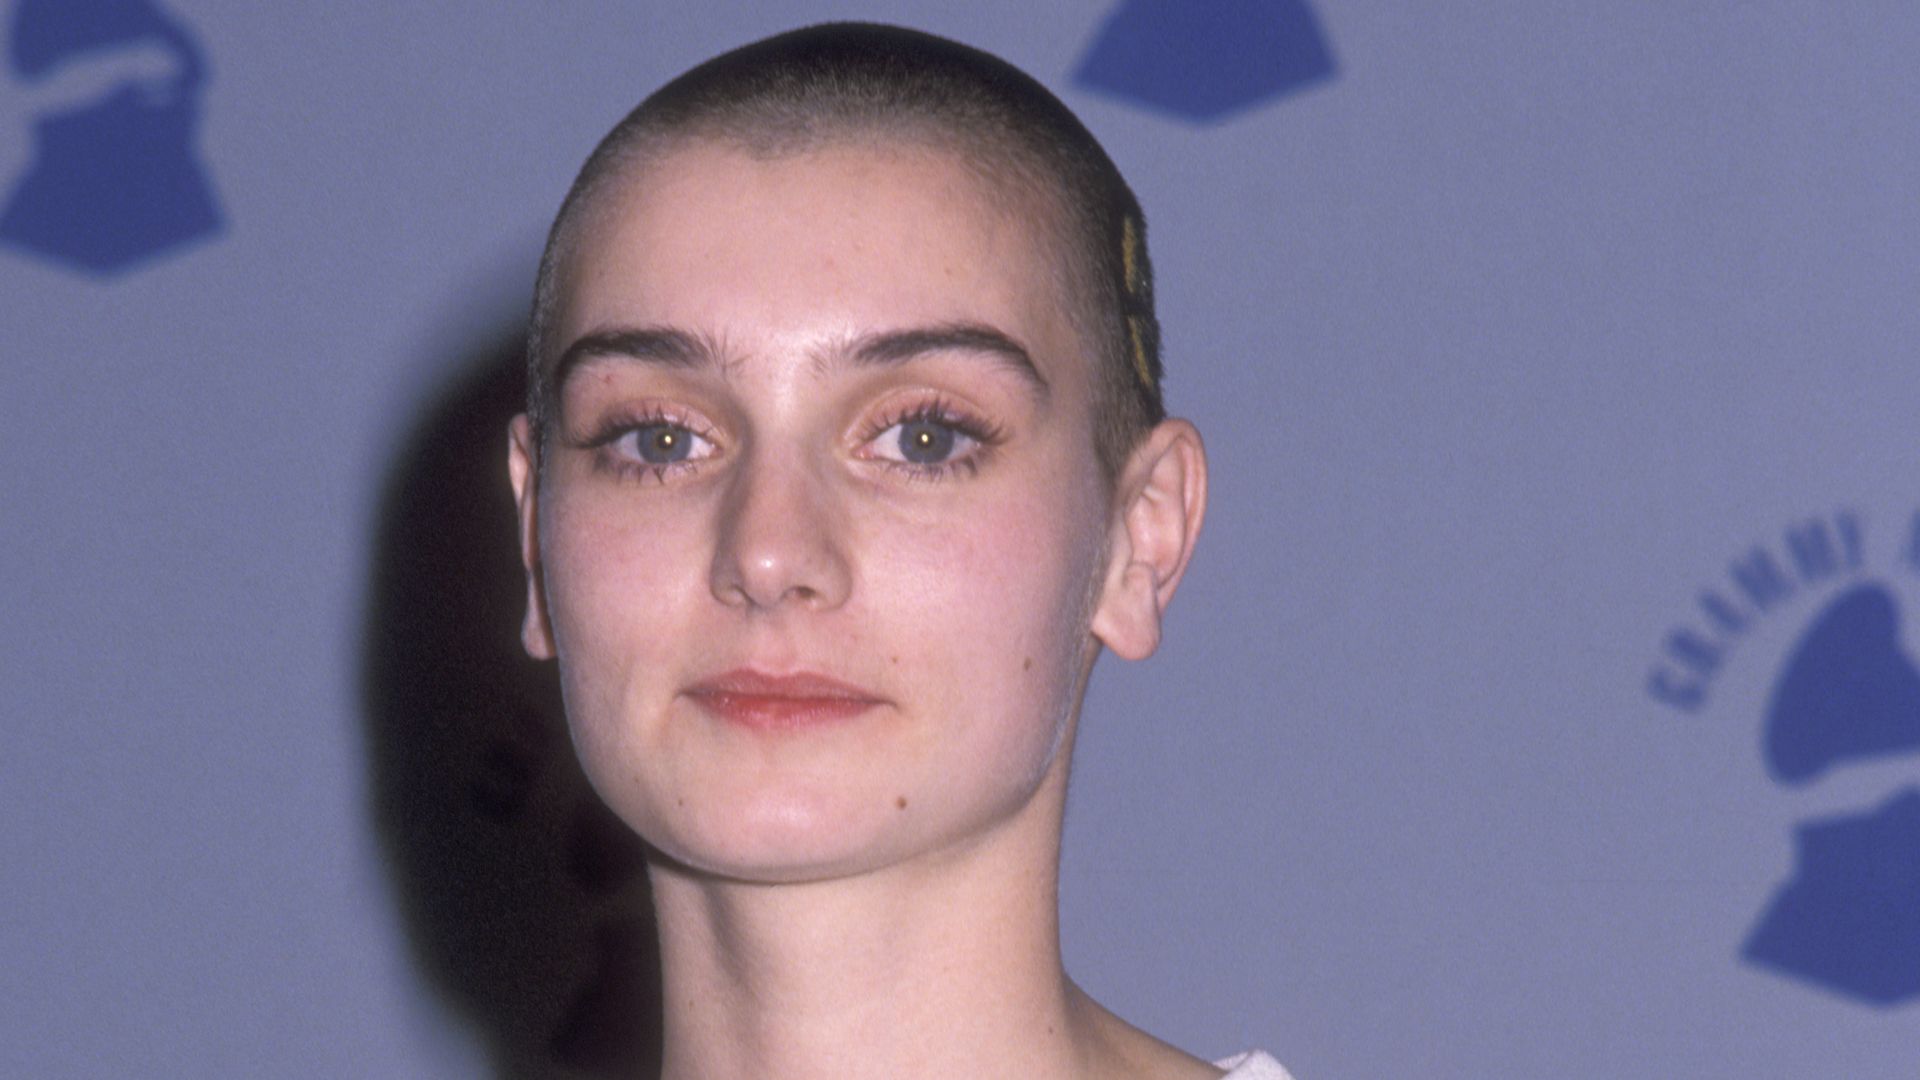 Musician Sinead O'Connor attends the 31st Annual Grammy Awards on February 22, 1989 at Shrine Auditorium in Los Angeles, California.